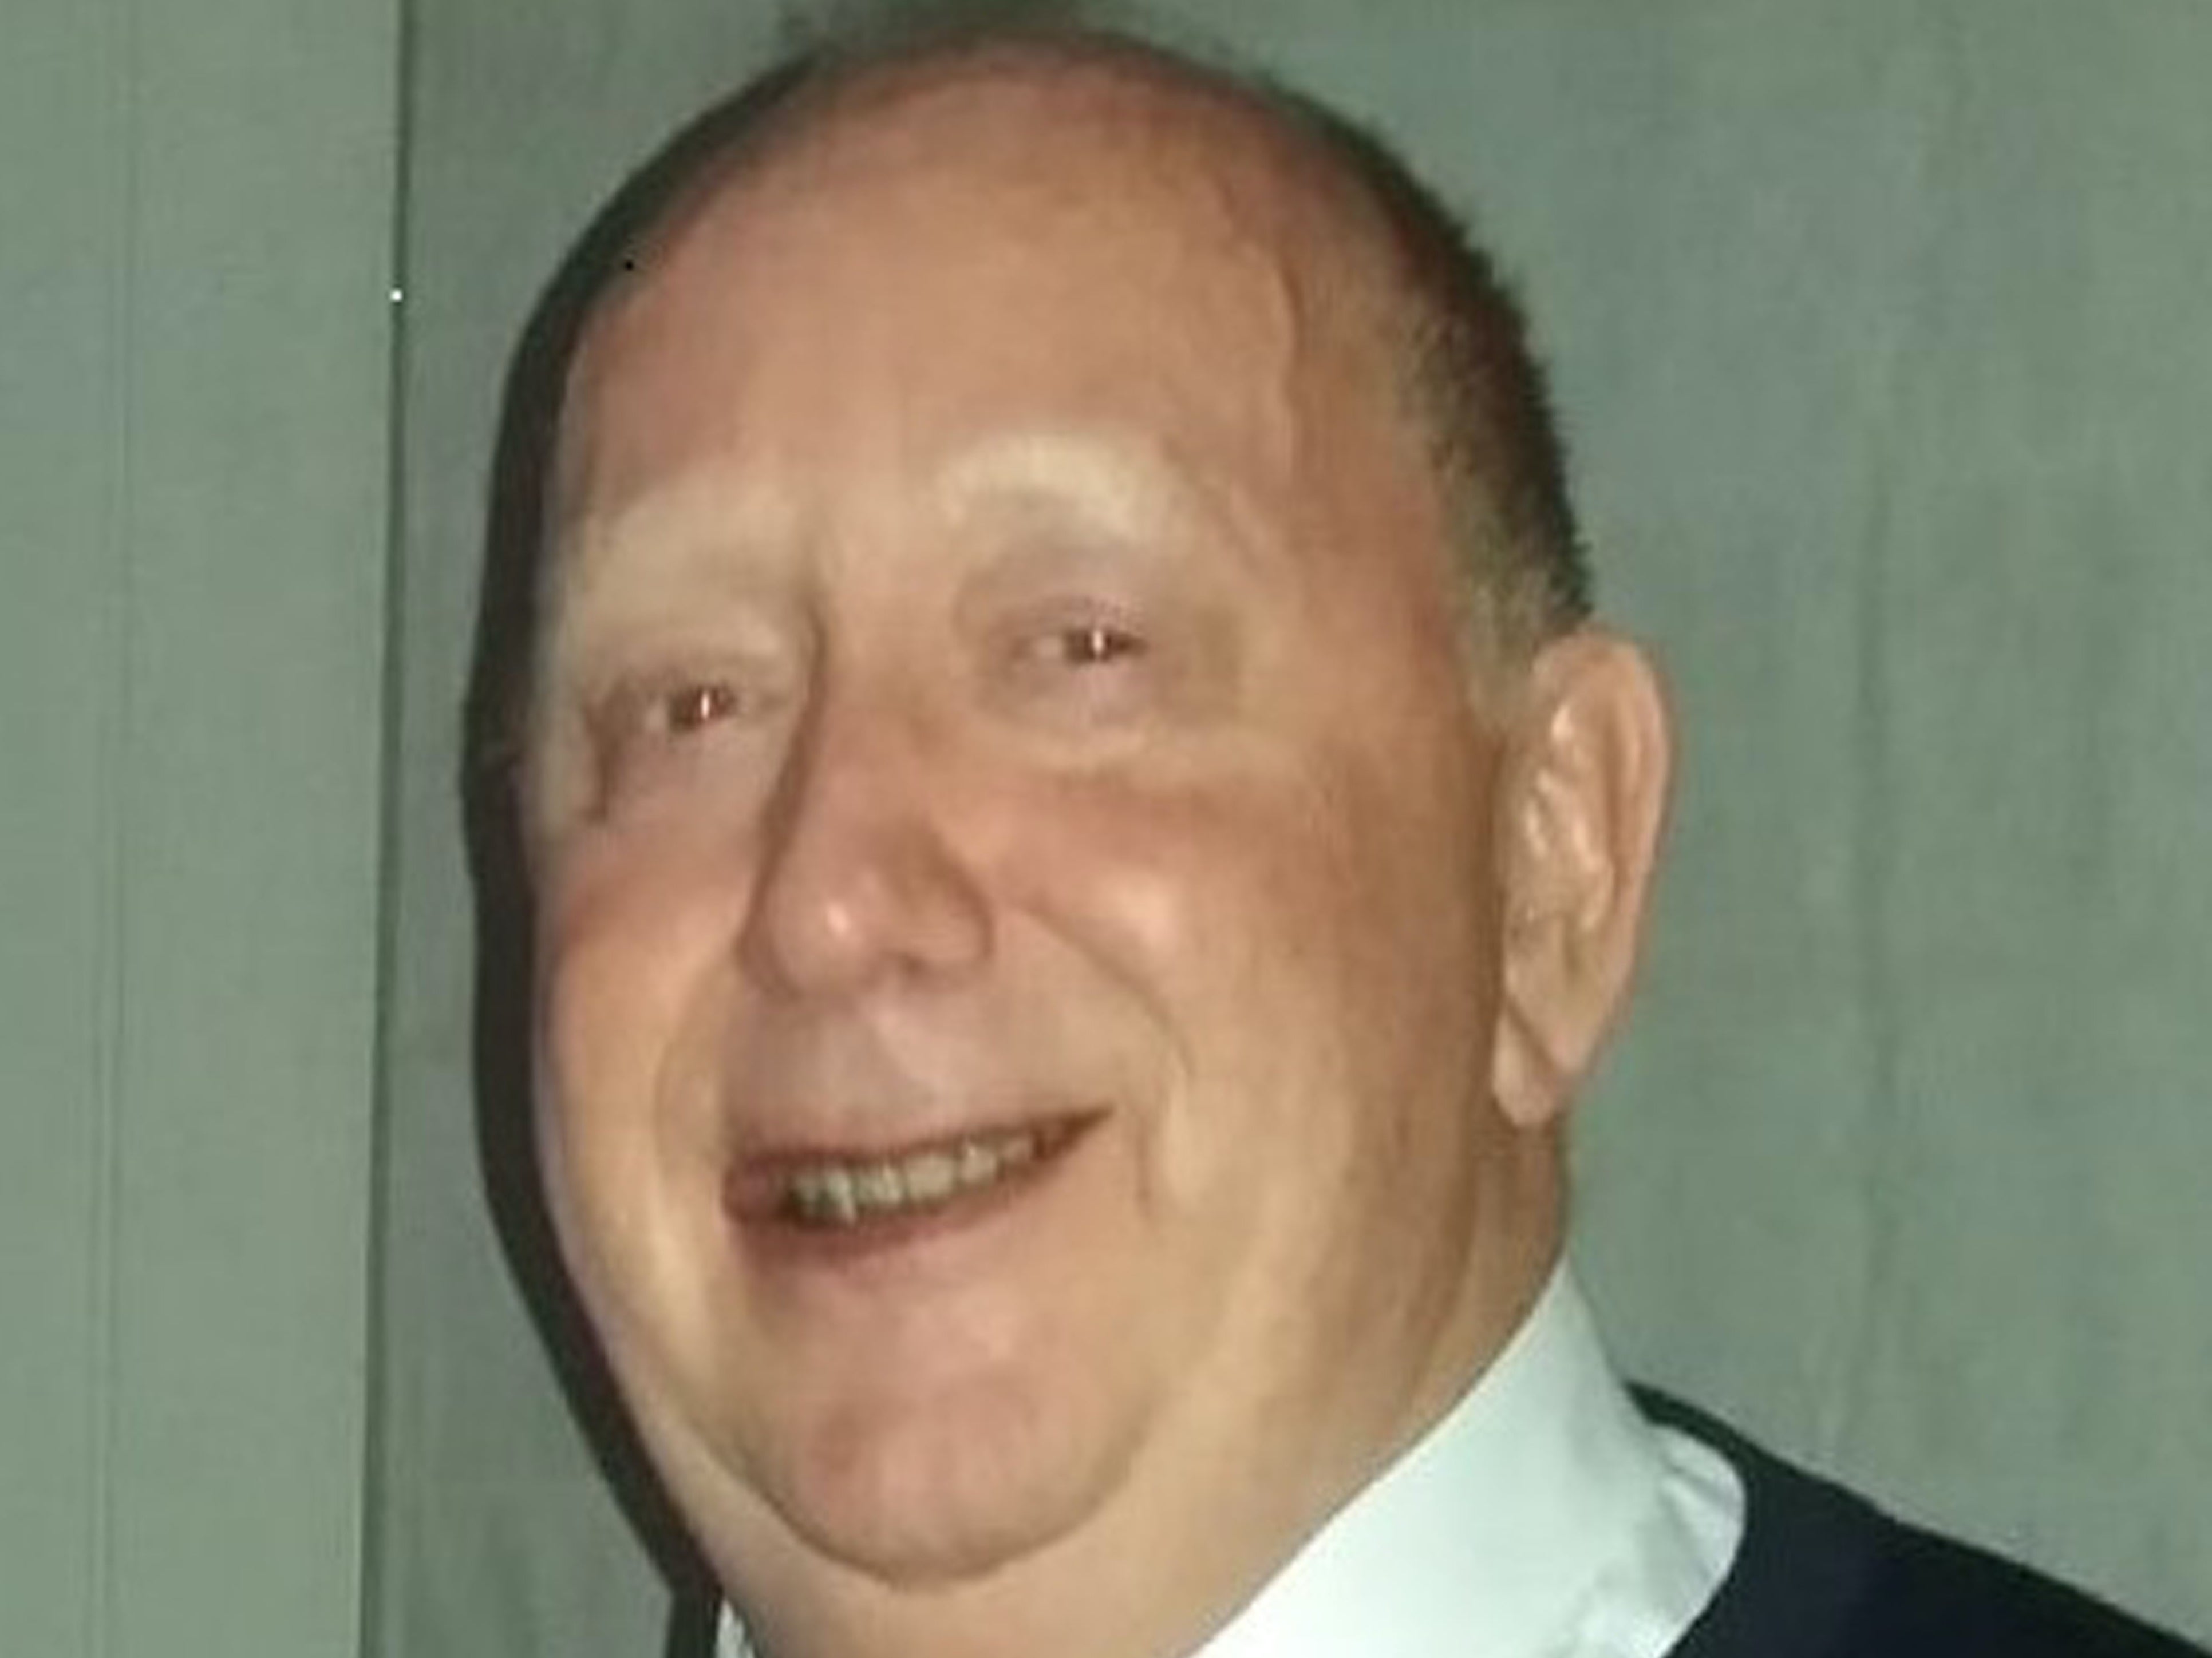 Former CPS senior lawyer Martin Decker was found dead at his home in Birkenhead, Wirral, on 7 March, 2021.